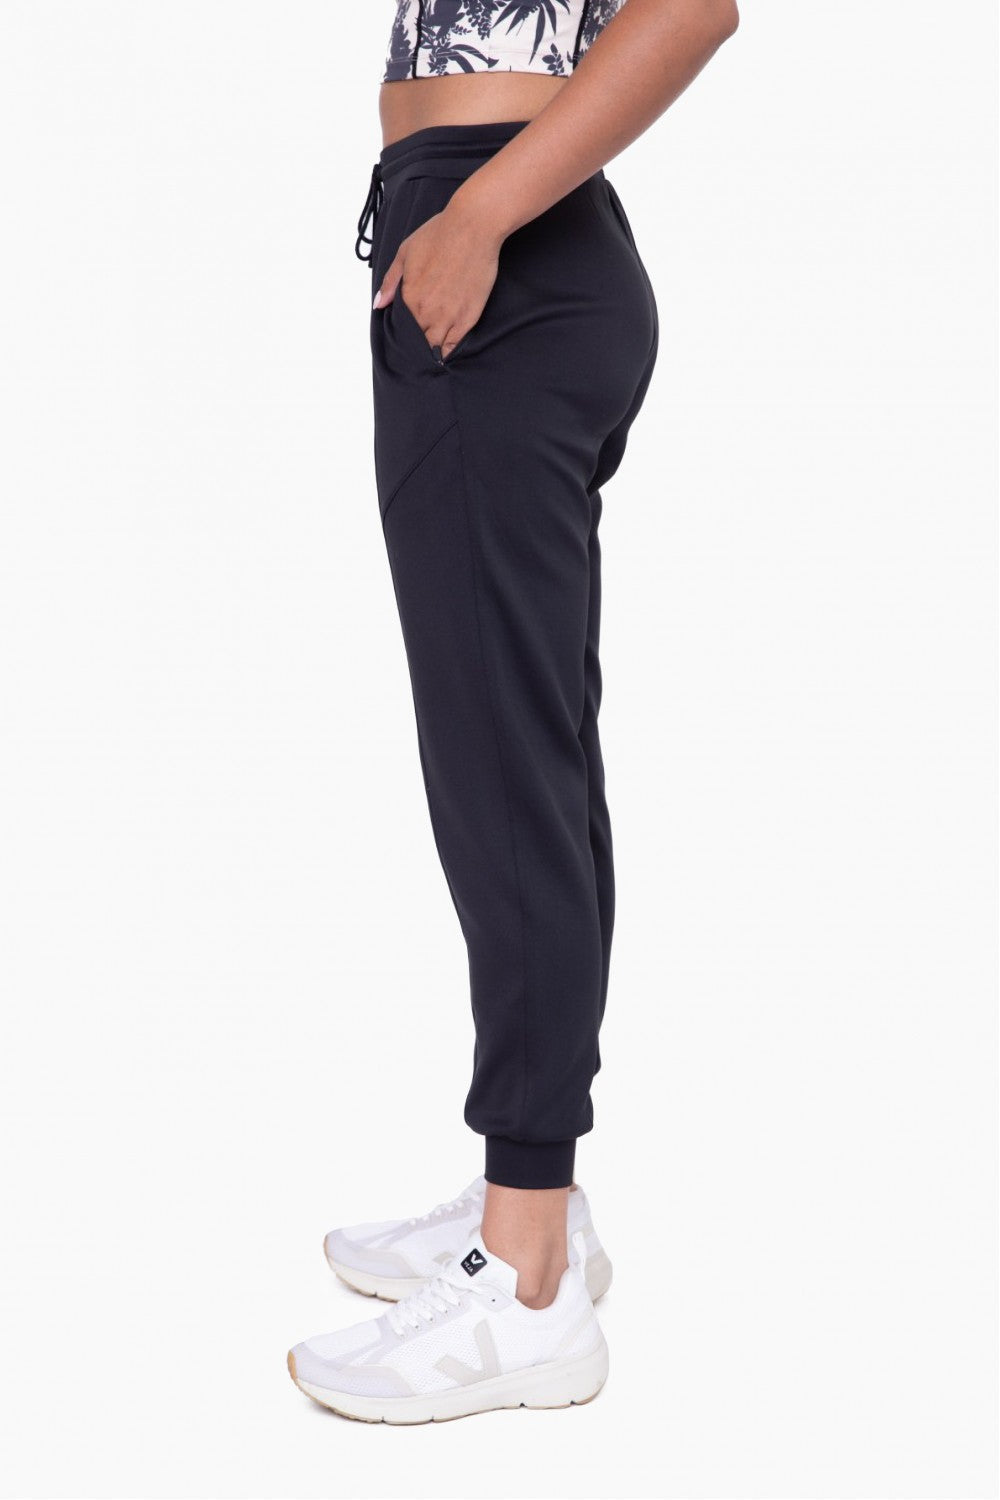 Cuffed Joggers with Zip Pockets - Blk